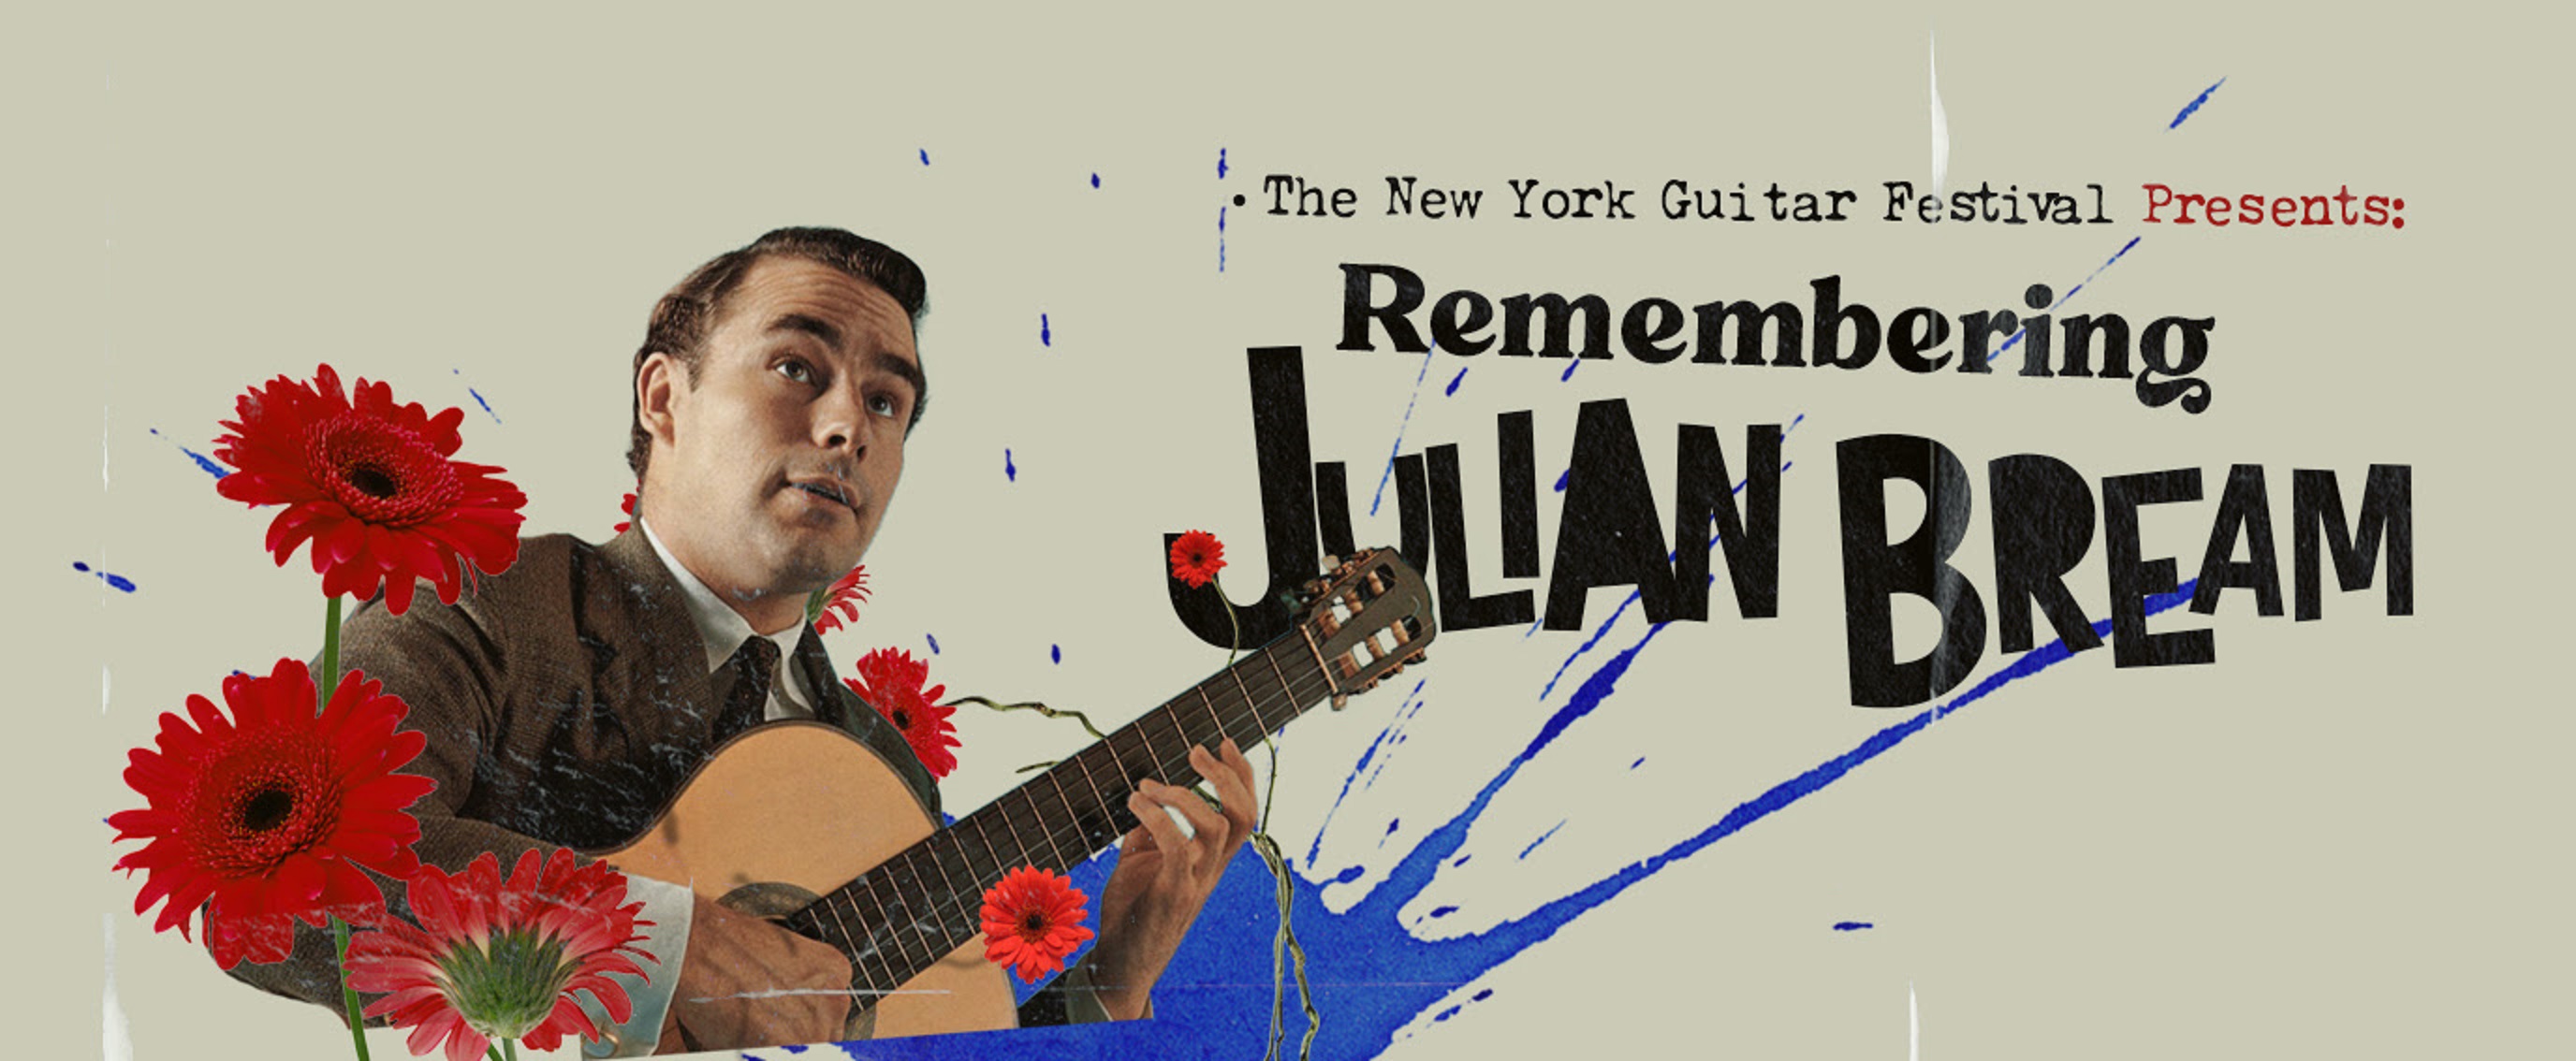 New York Guitar Festival’s Online Performance Series  Continues This Week